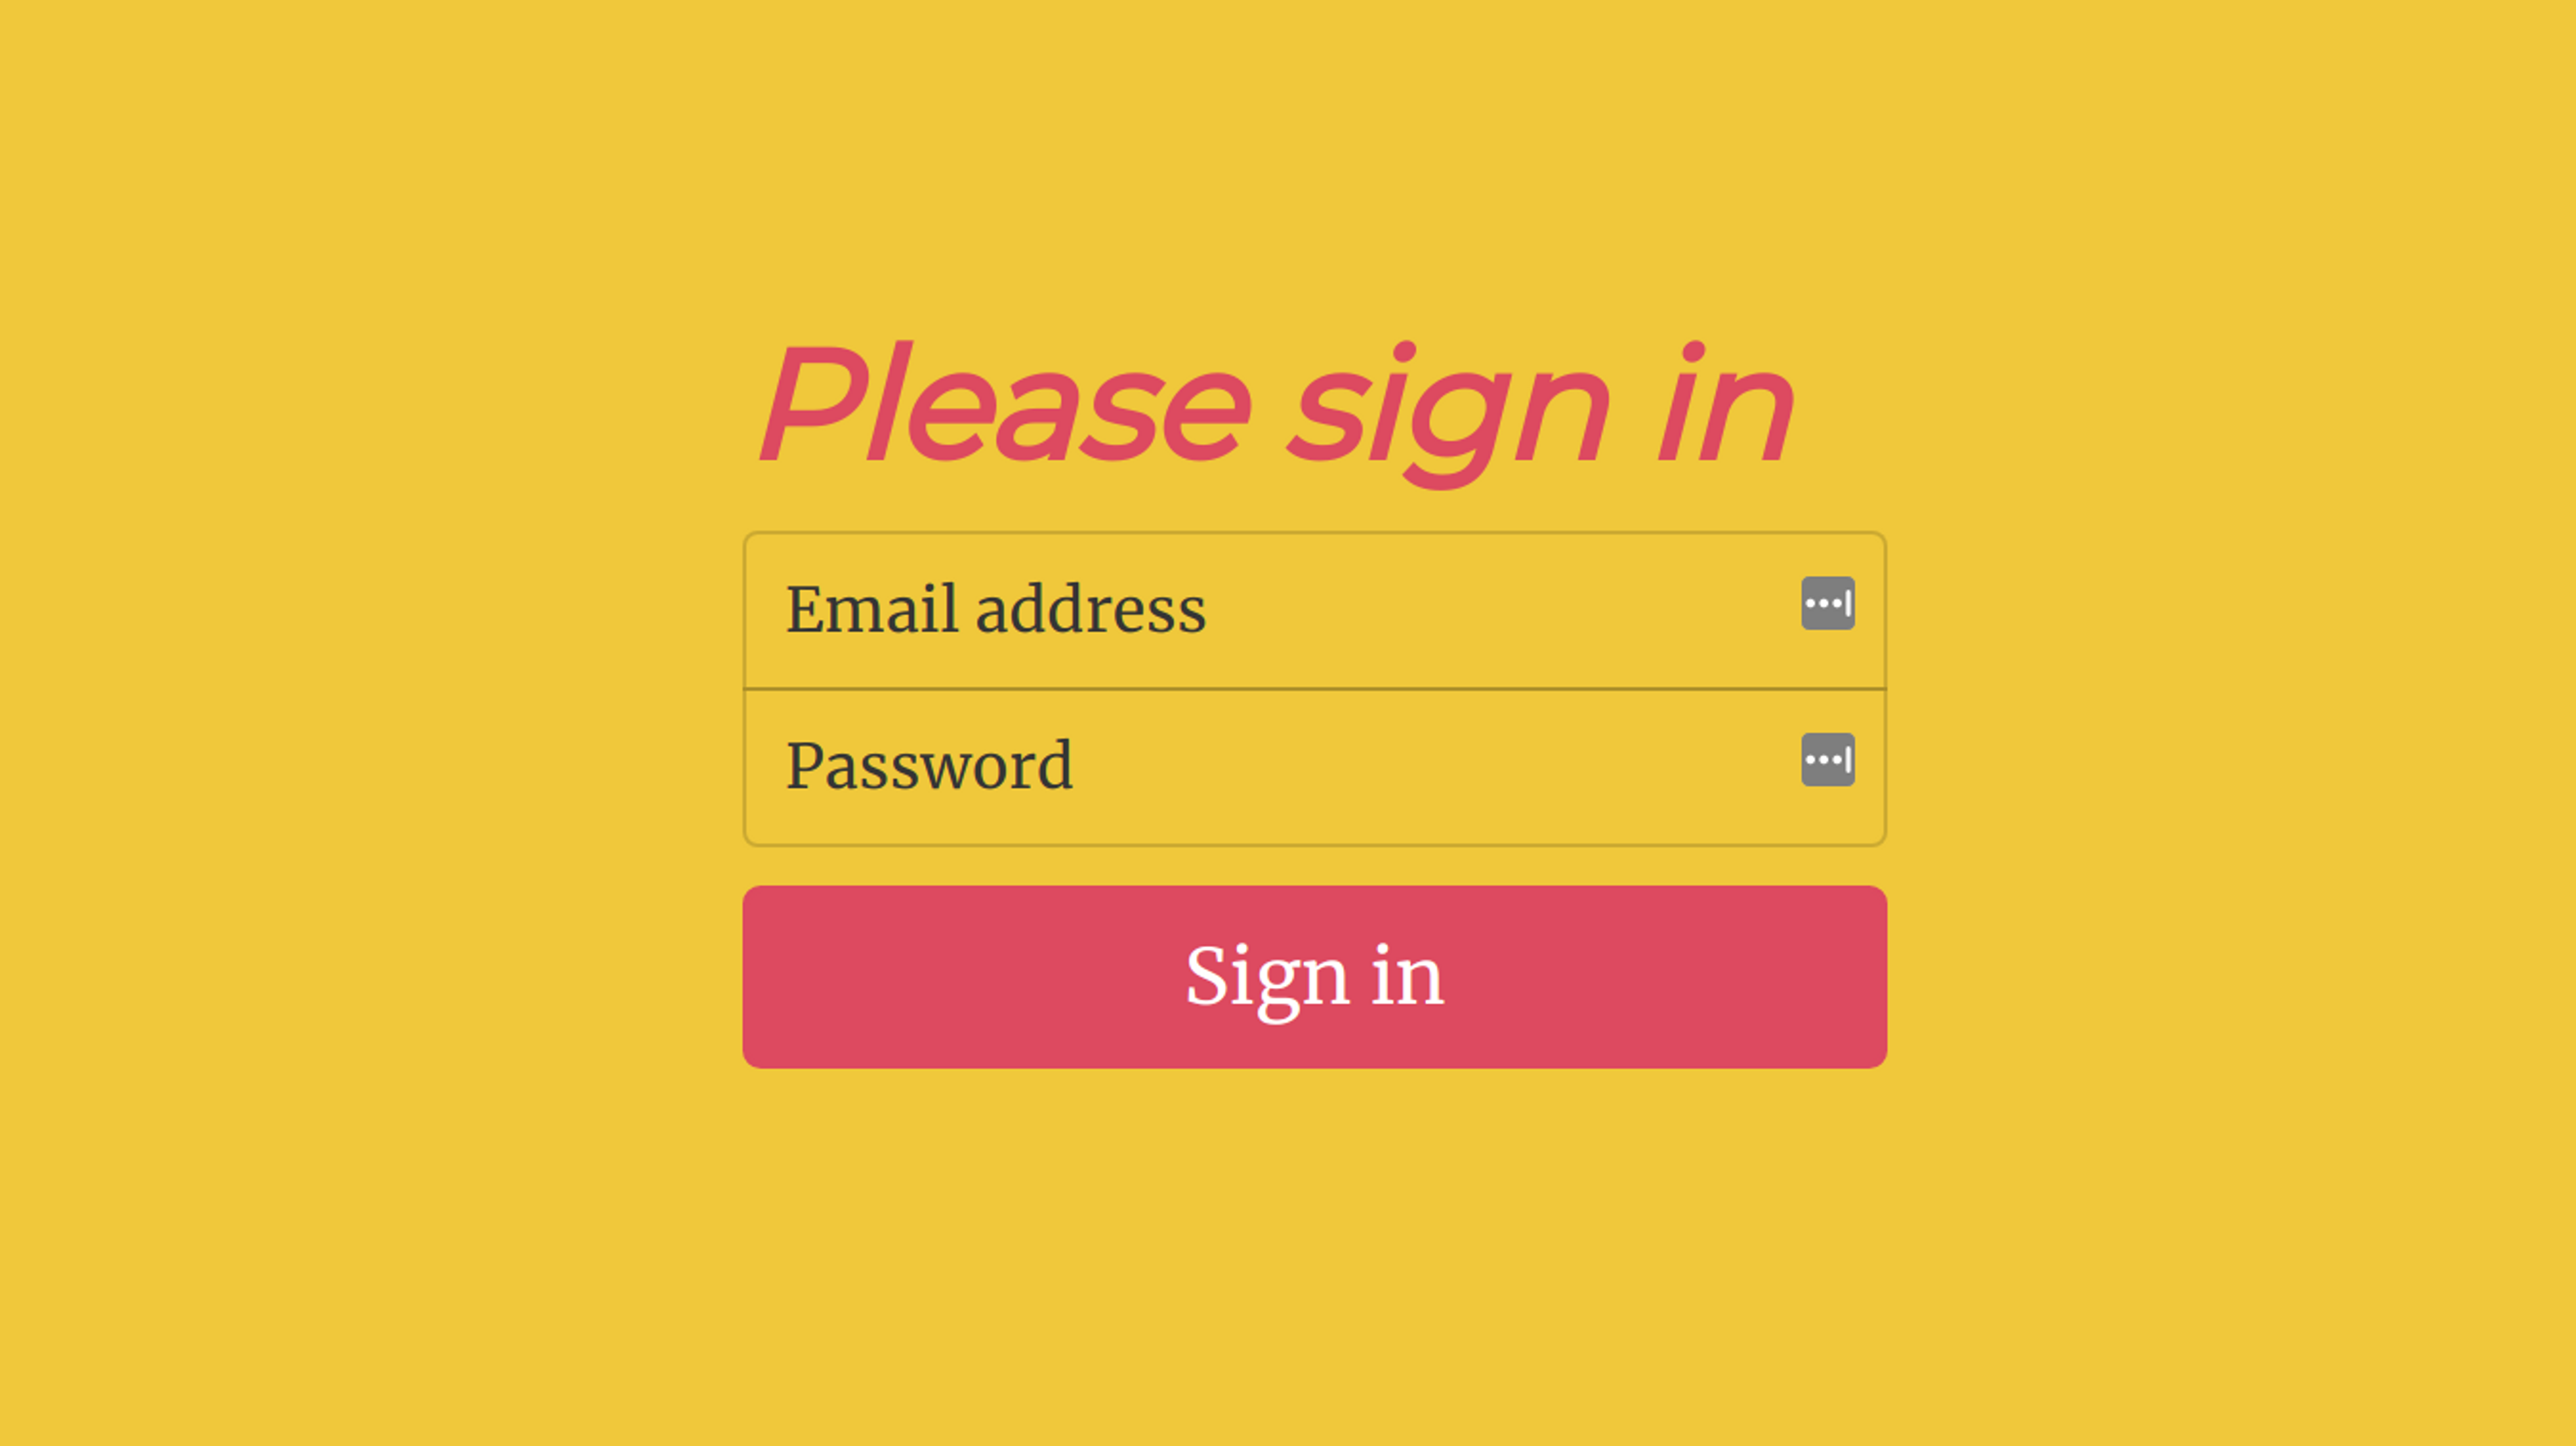 The Sign In page of the sample web application